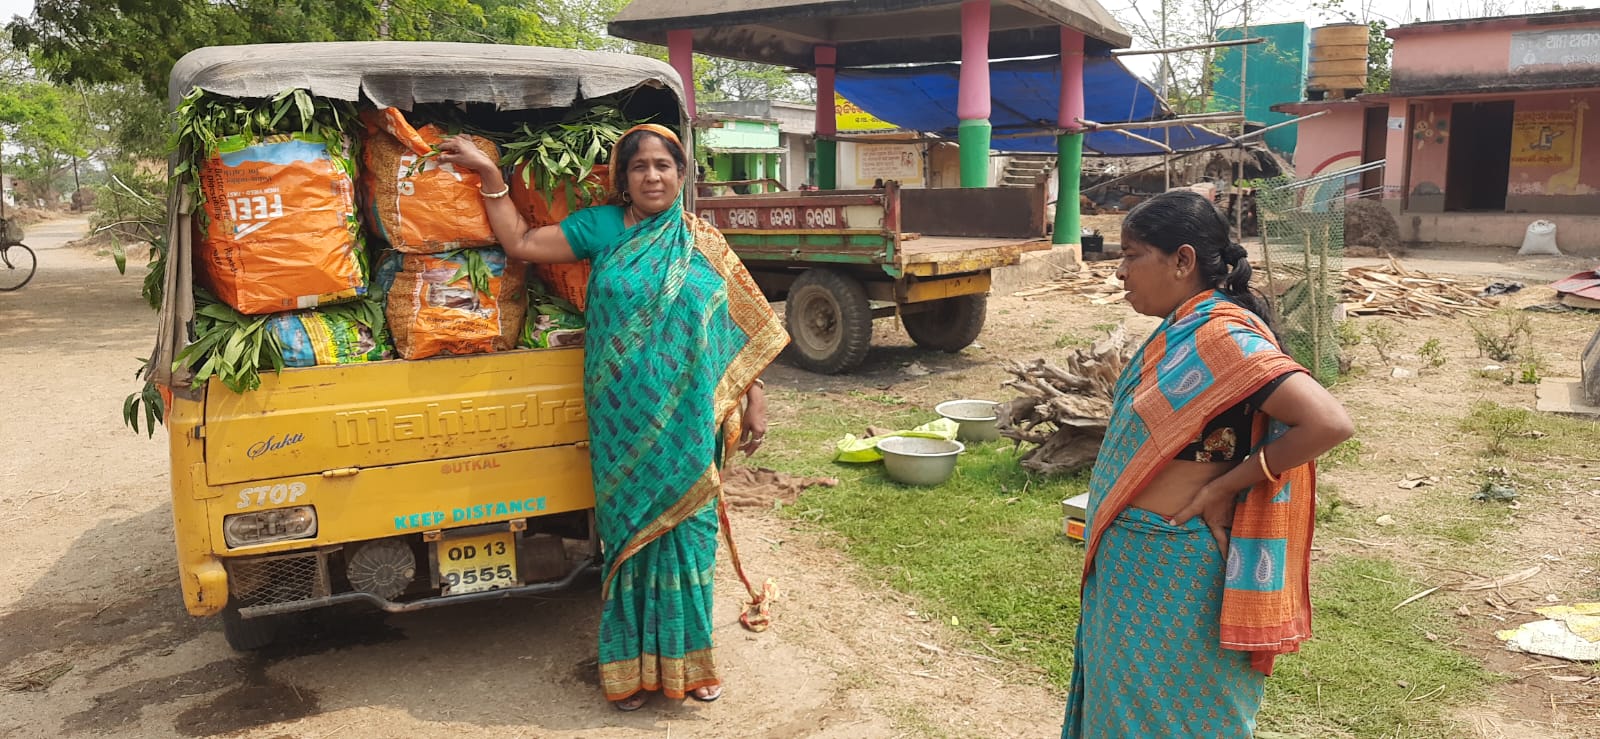 Indian woman in sari stands next to a truck filled with produce while another Indian woman looks on